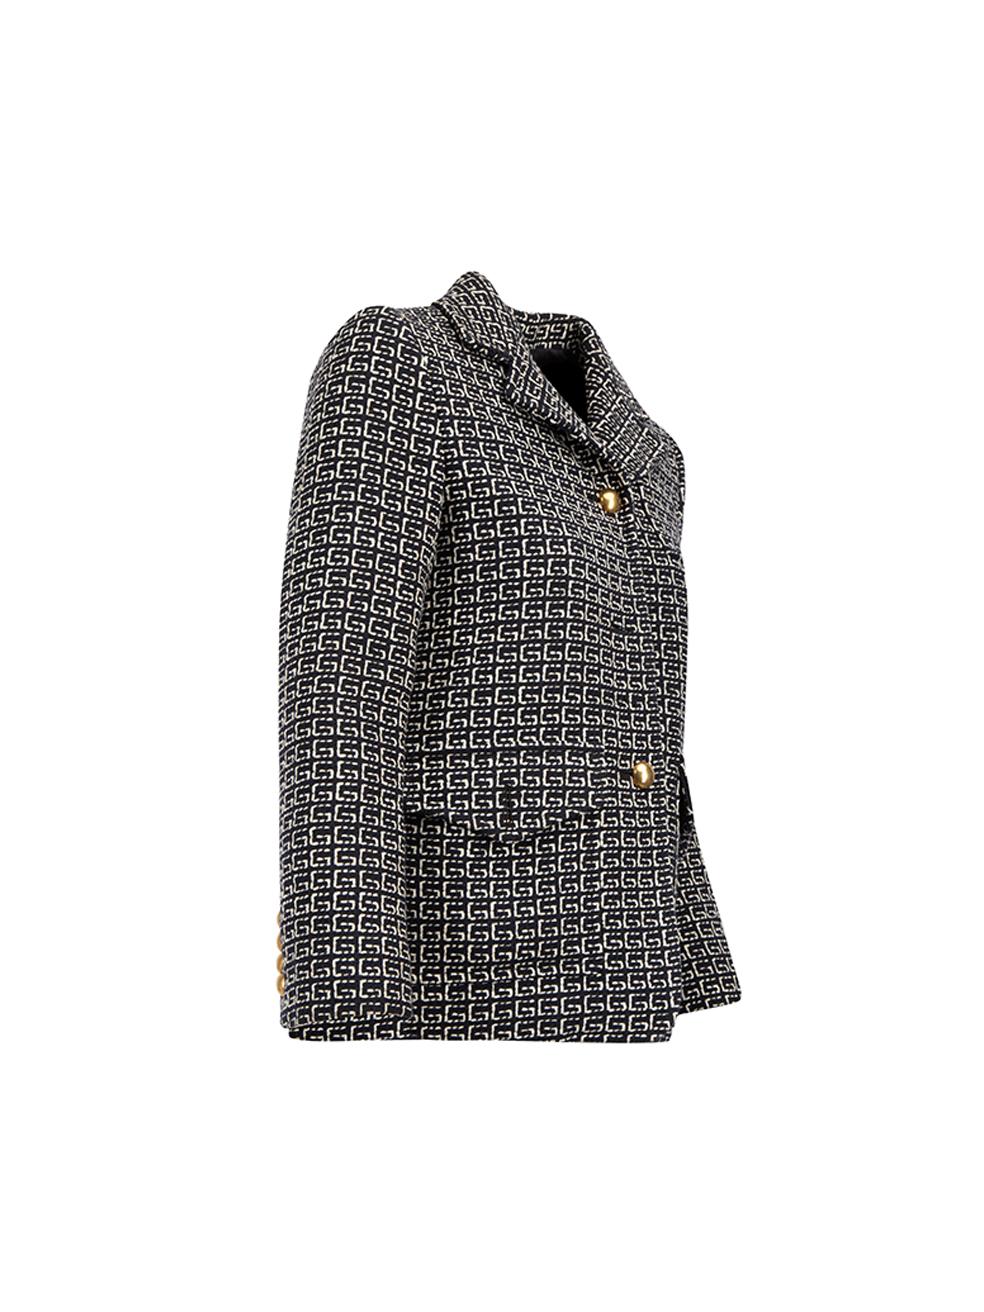 CONDITION is Very good. Minimal wear to blazer is evident. Minimal scuffs to the gold buttons, especially the buttons on the left sleeve on this used Gucci designer resale item. 



Details


Navy

Tweed

Single breasted blazer

Buttoned cuffs

GG